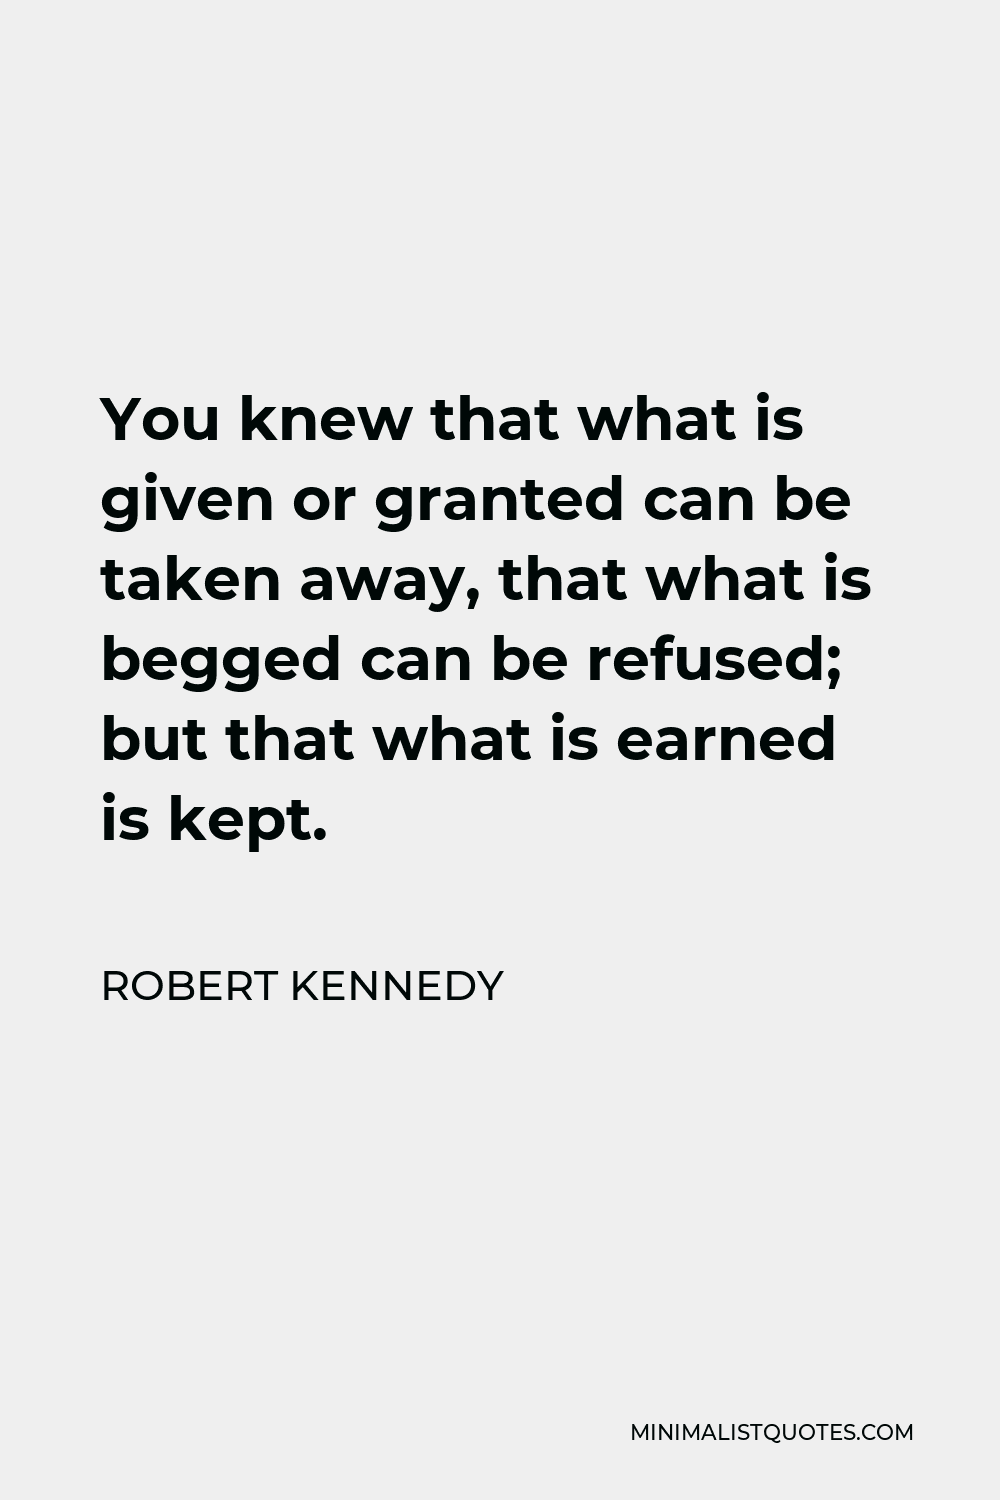 Robert Kennedy Quote - You knew that what is given or granted can be taken away, that what is begged can be refused; but that what is earned is kept.